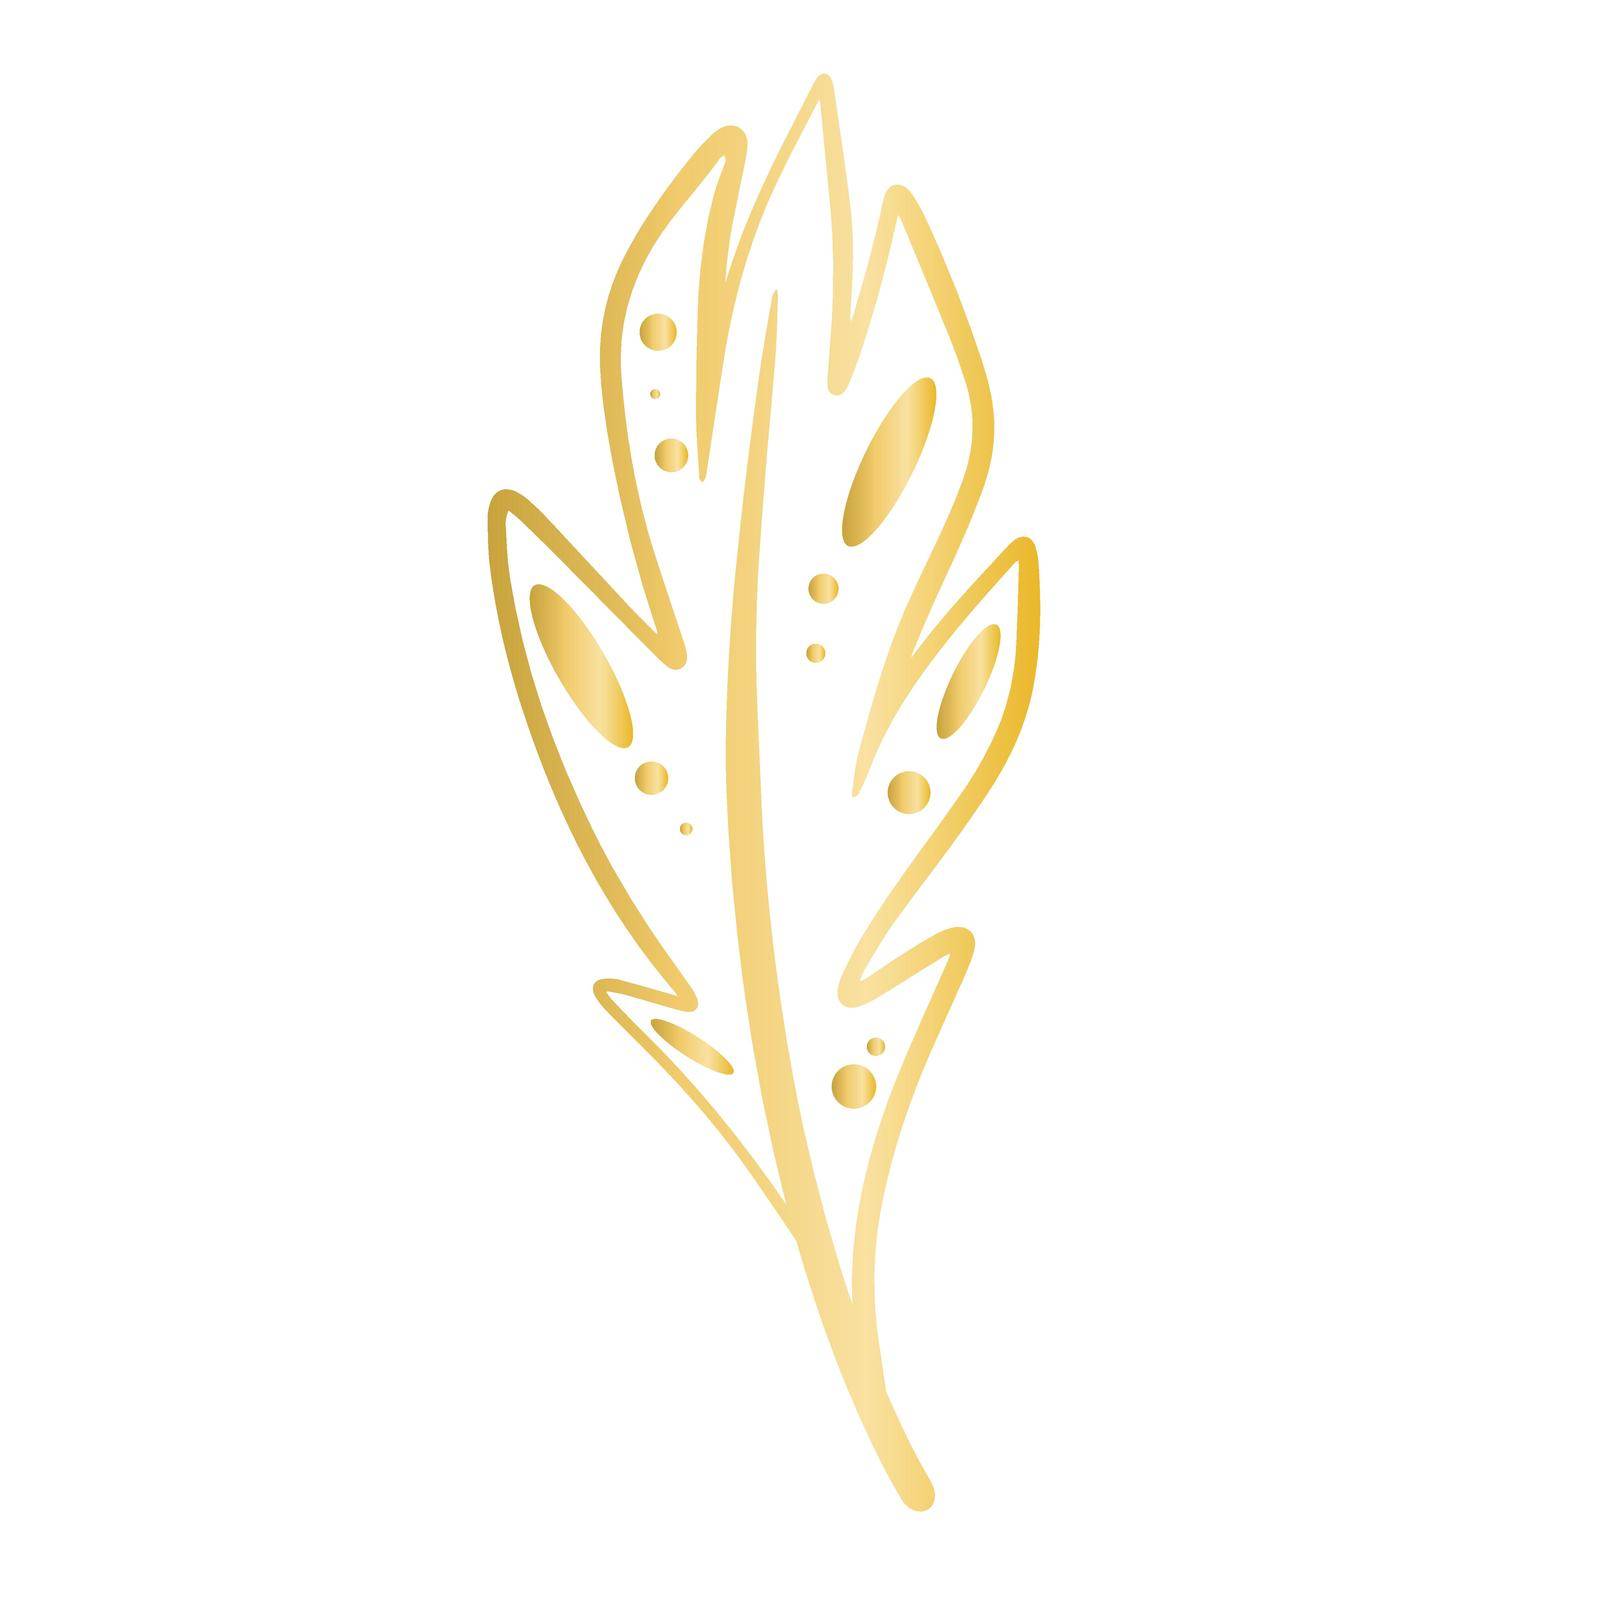 Golden decorative feather isolated vector illustration by TassiaK